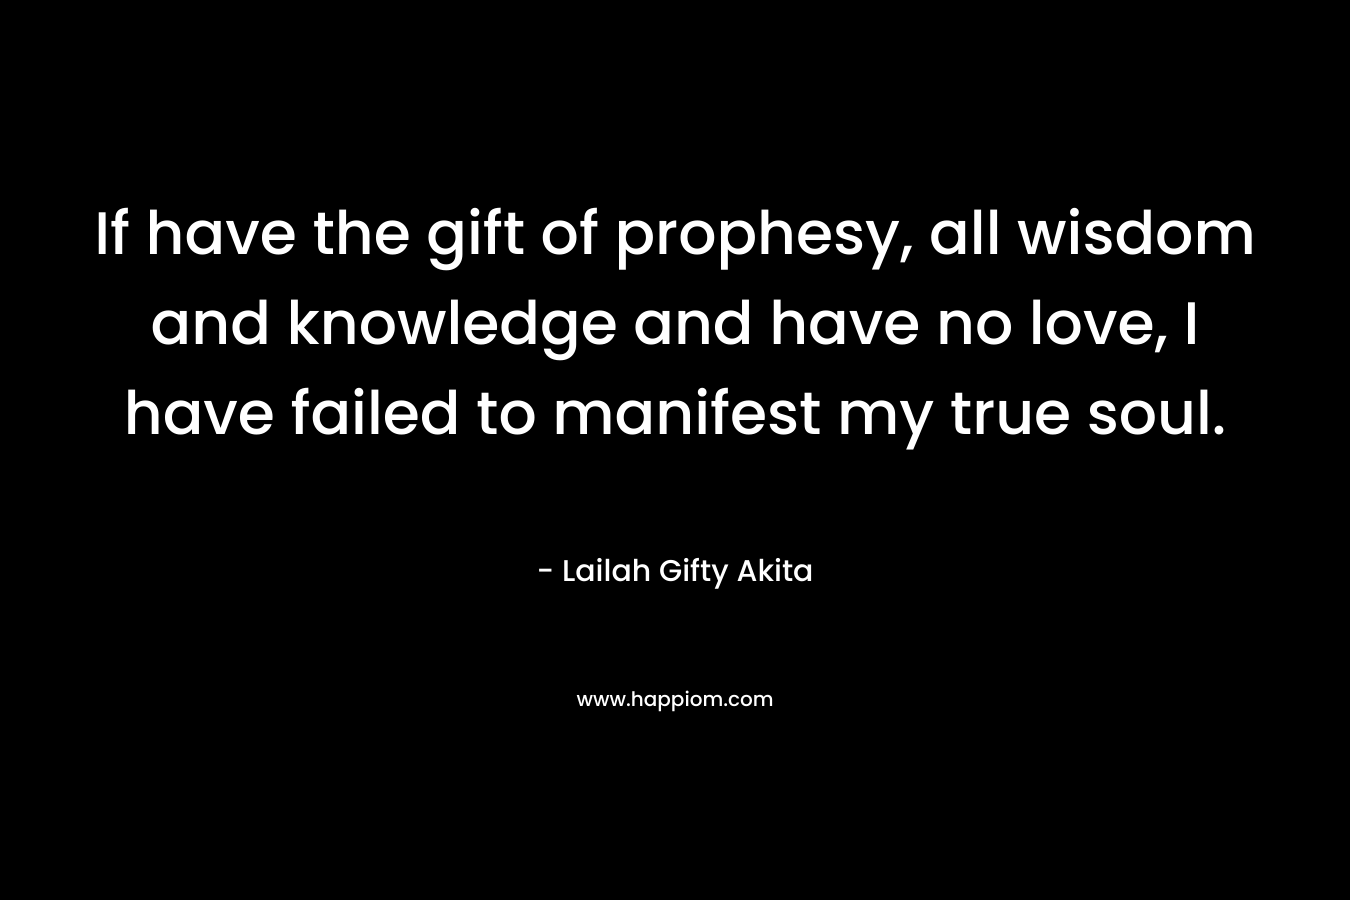 If have the gift of prophesy, all wisdom and knowledge and have no love, I have failed to manifest my true soul.